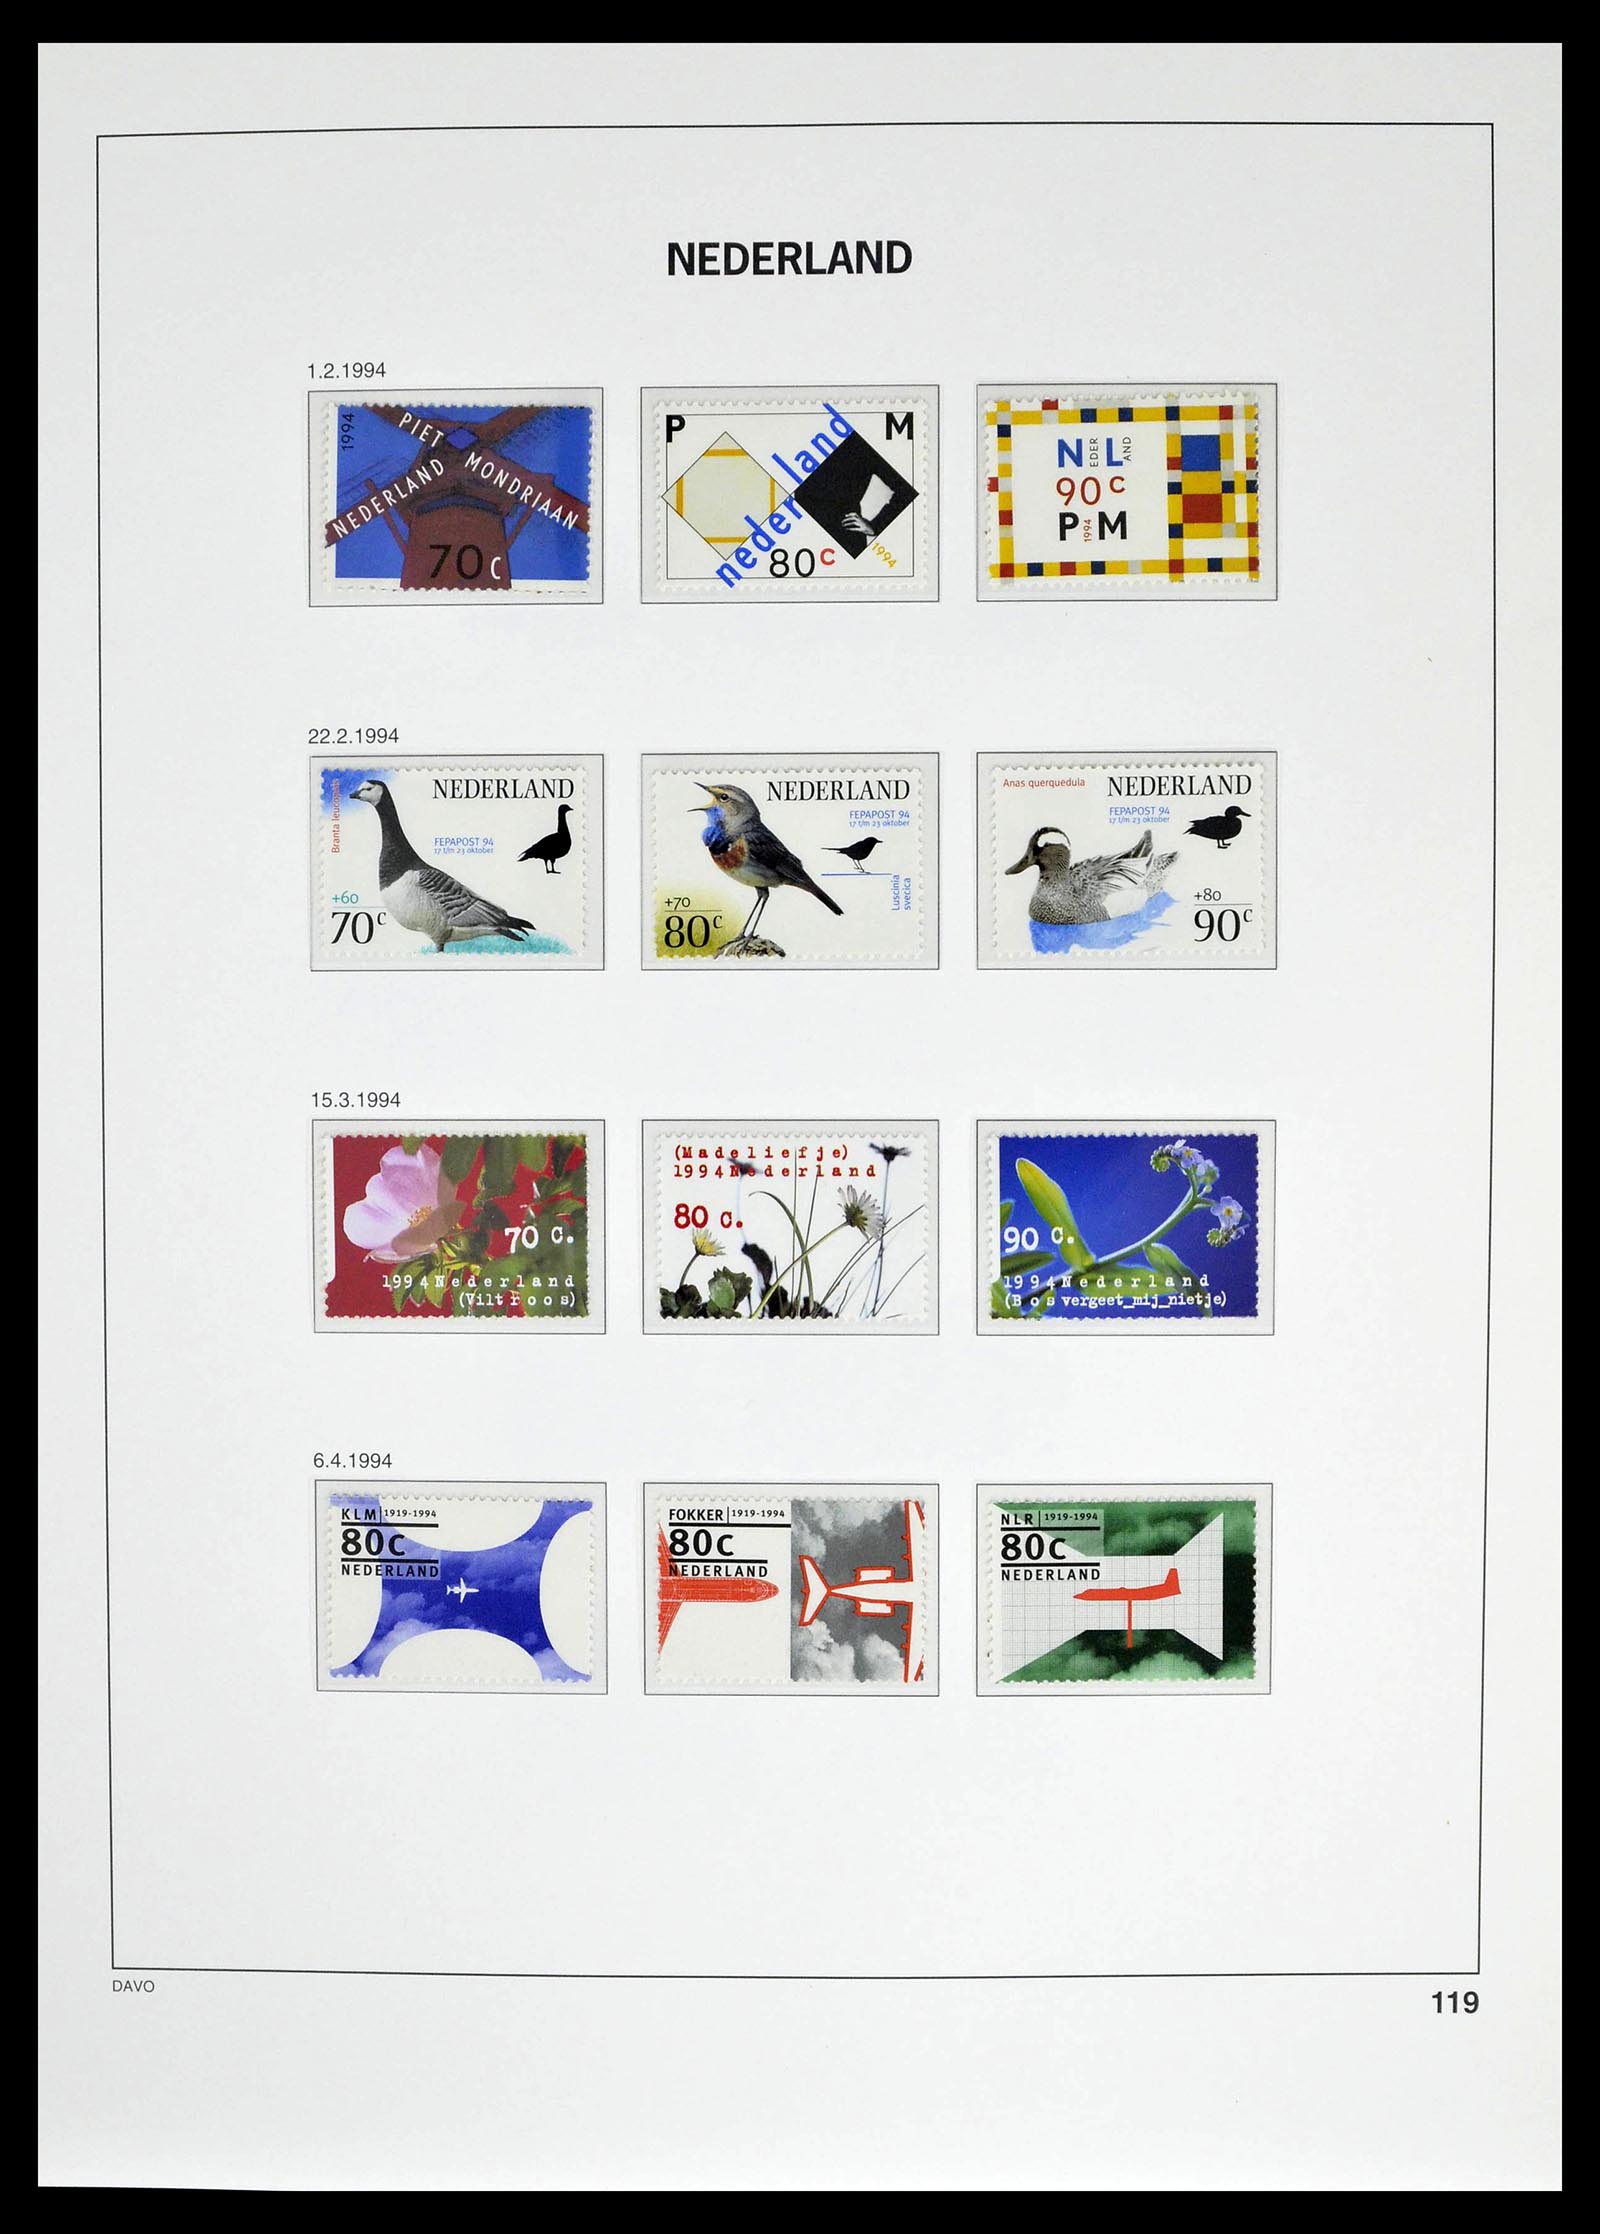 39136 0072 - Stamp collection 39136 Netherlands 1975-2020!